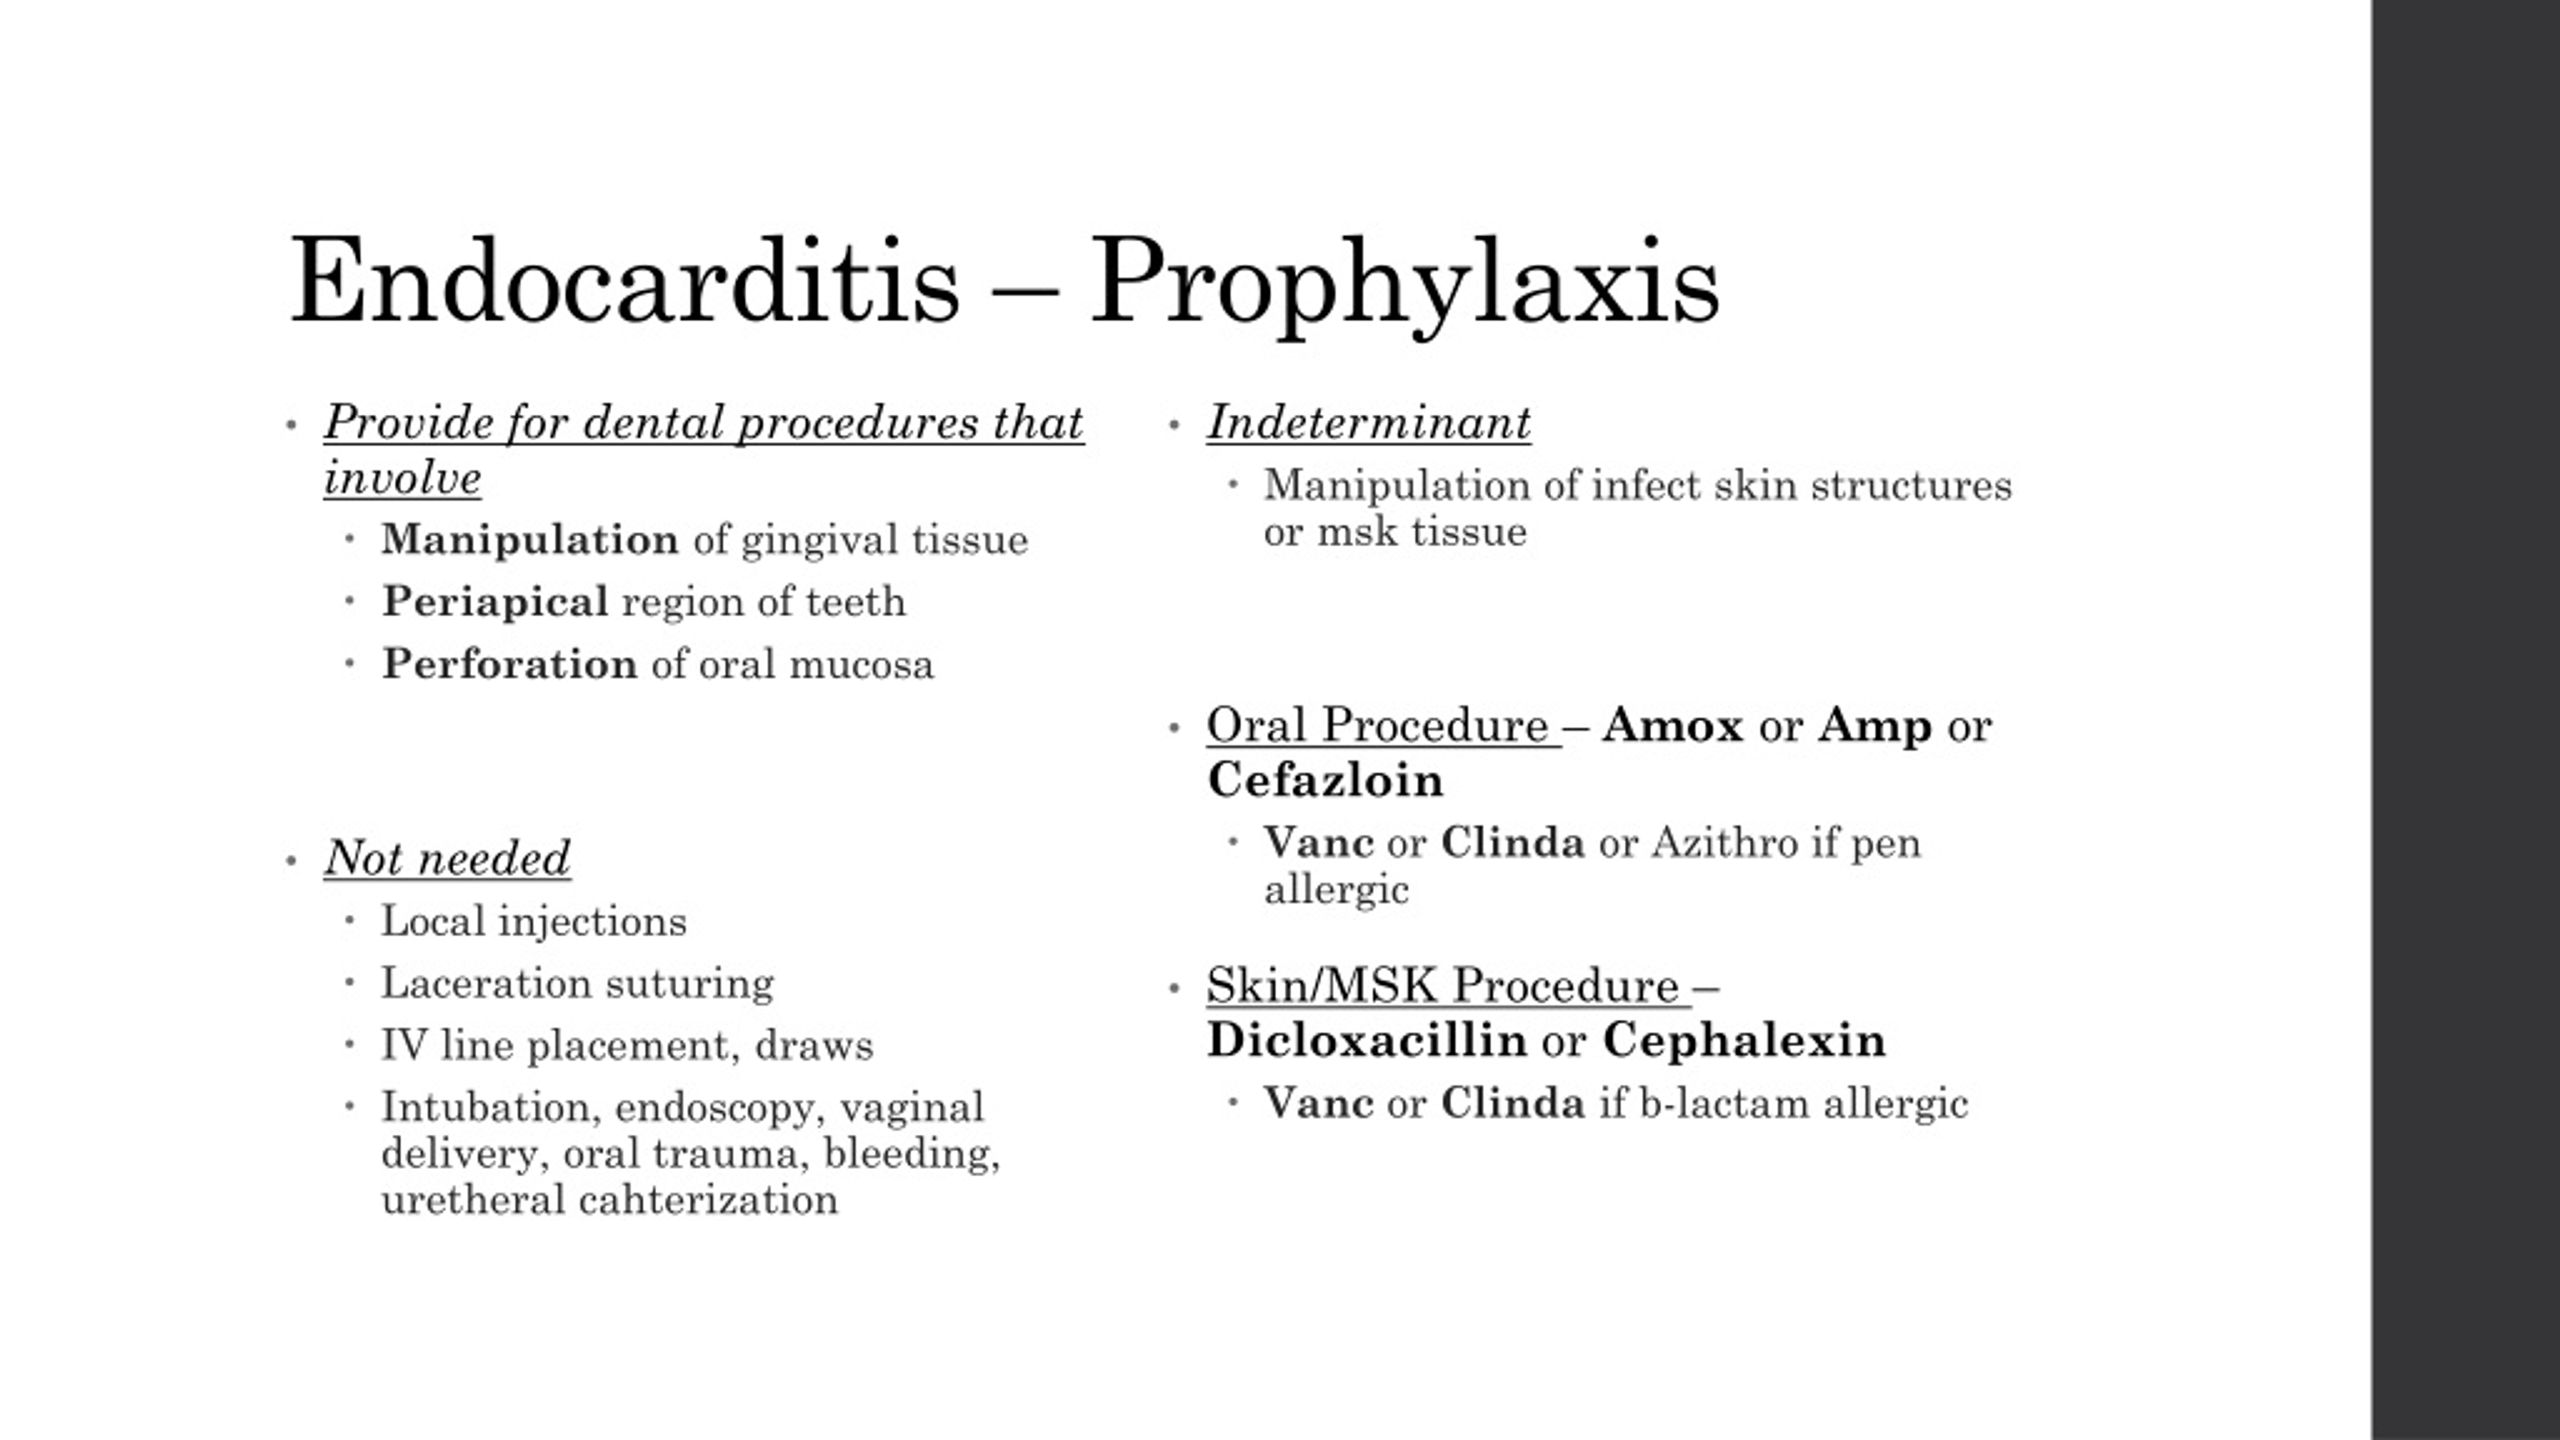 PPT Infectious Disease Endocarditis Serious Viral